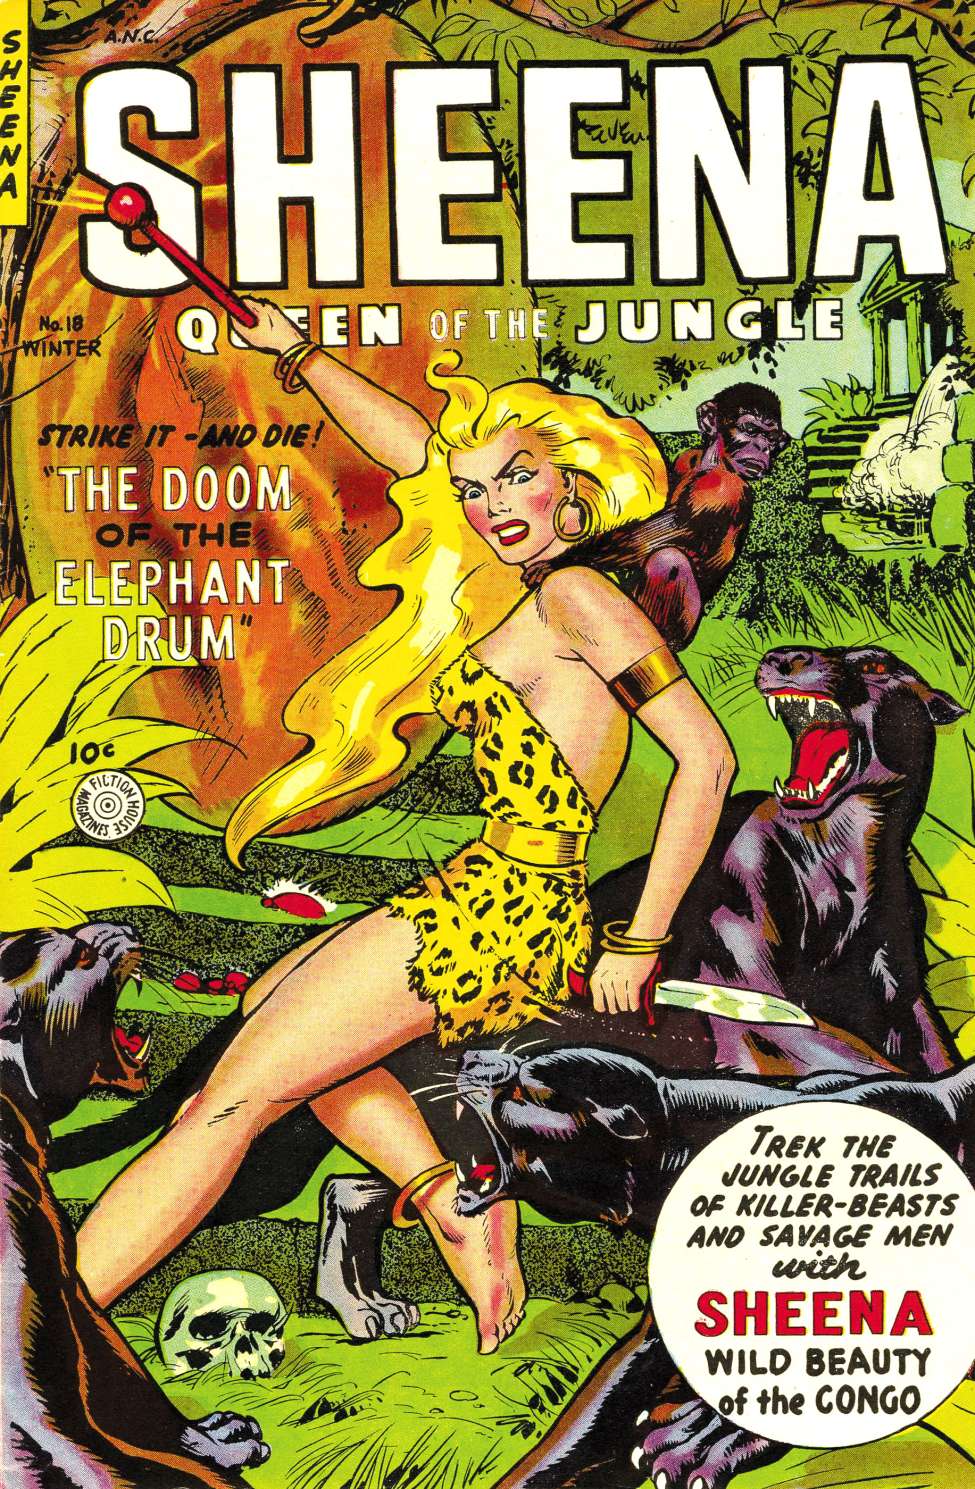 Comic Book Cover For Sheena, Queen of the Jungle 18 - Version 2